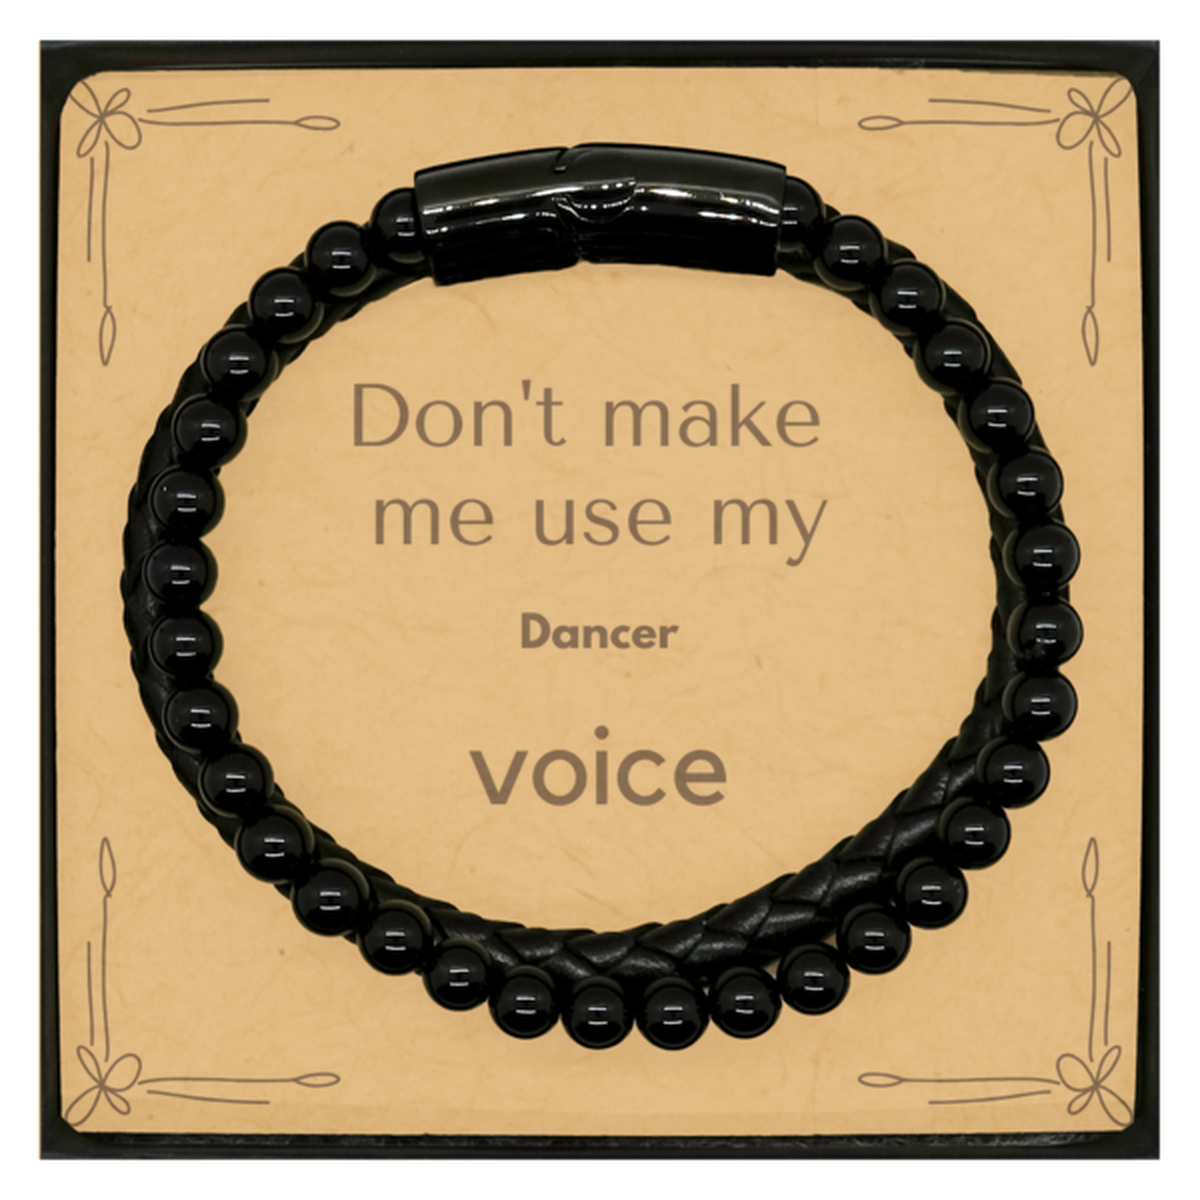 Don't make me use my Dancer voice, Sarcasm Dancer Card Gifts, Christmas Dancer Stone Leather Bracelets Birthday Unique Gifts For Dancer Coworkers, Men, Women, Colleague, Friends